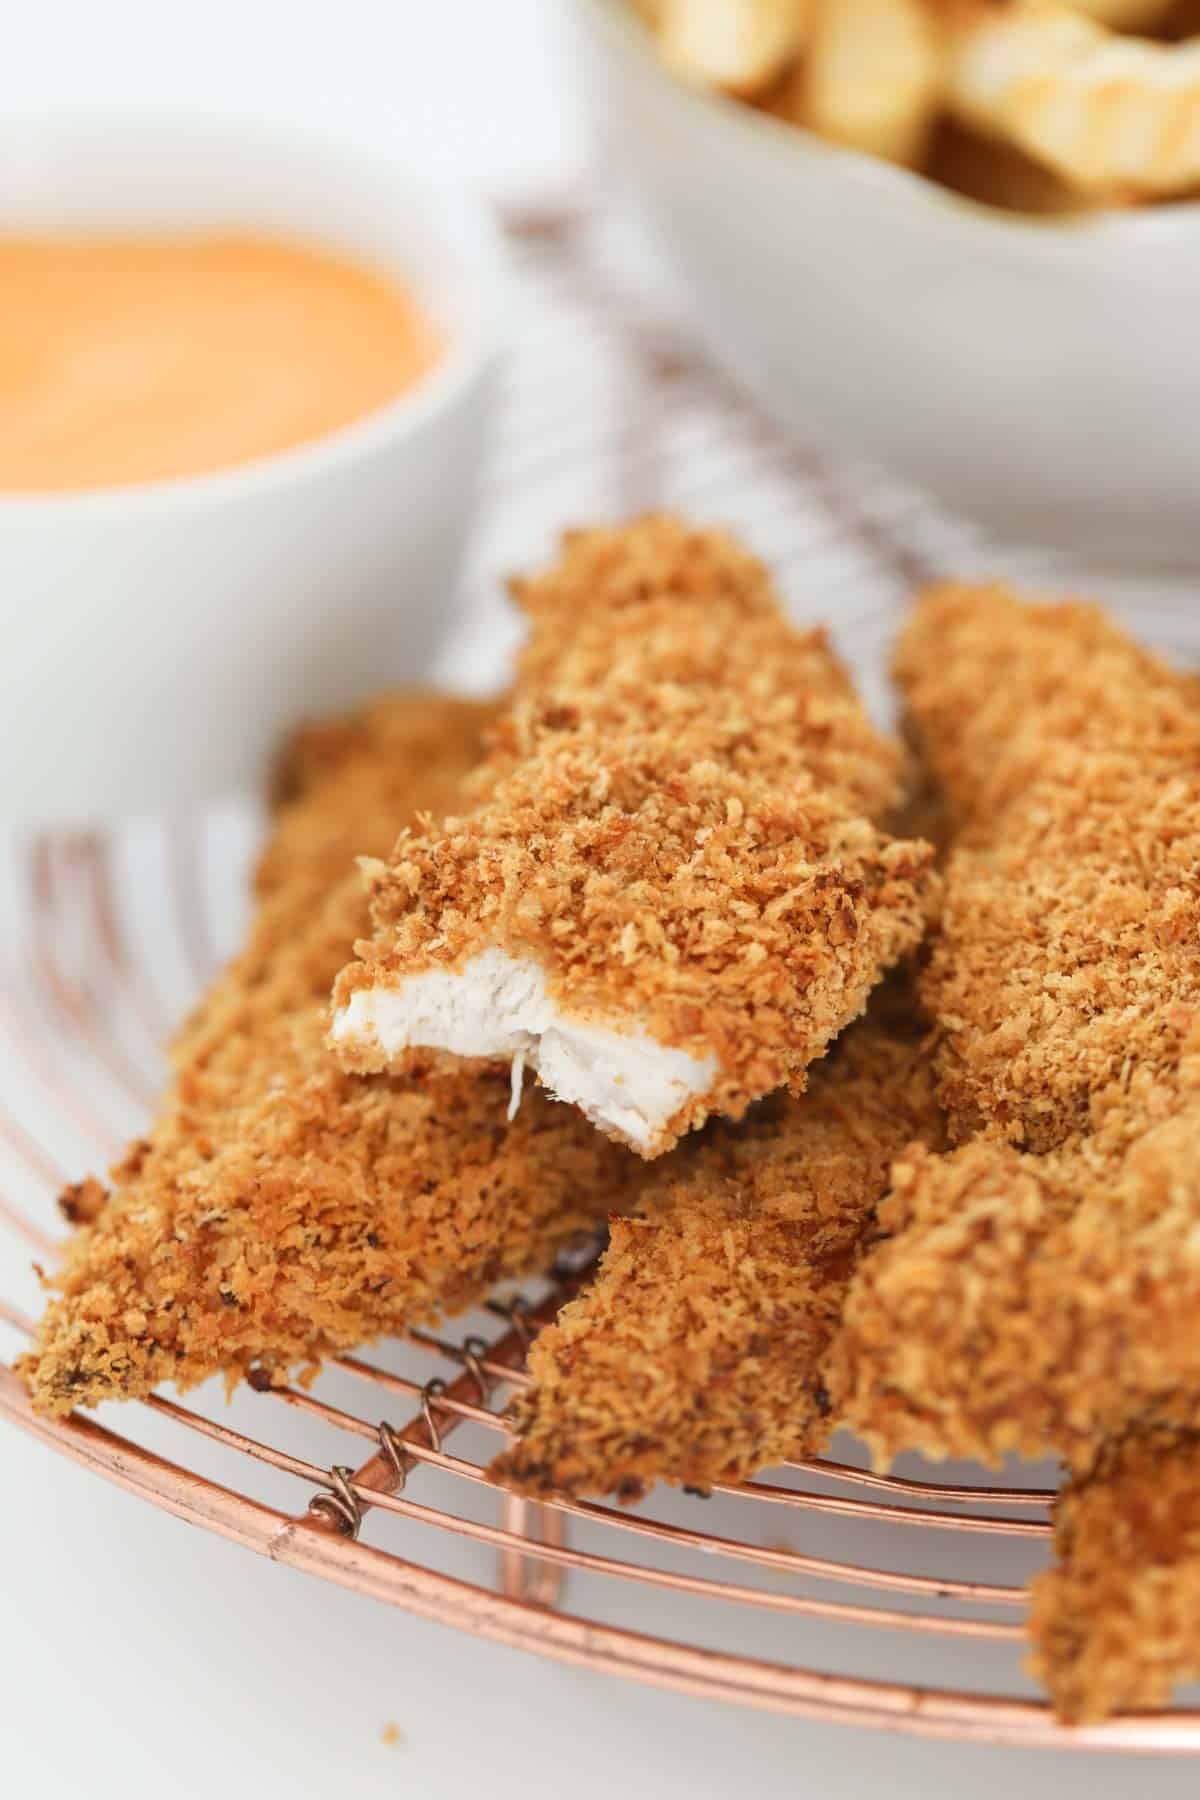 Crunchy breadcrumbed strips of baked chicken with a bite taken from one.